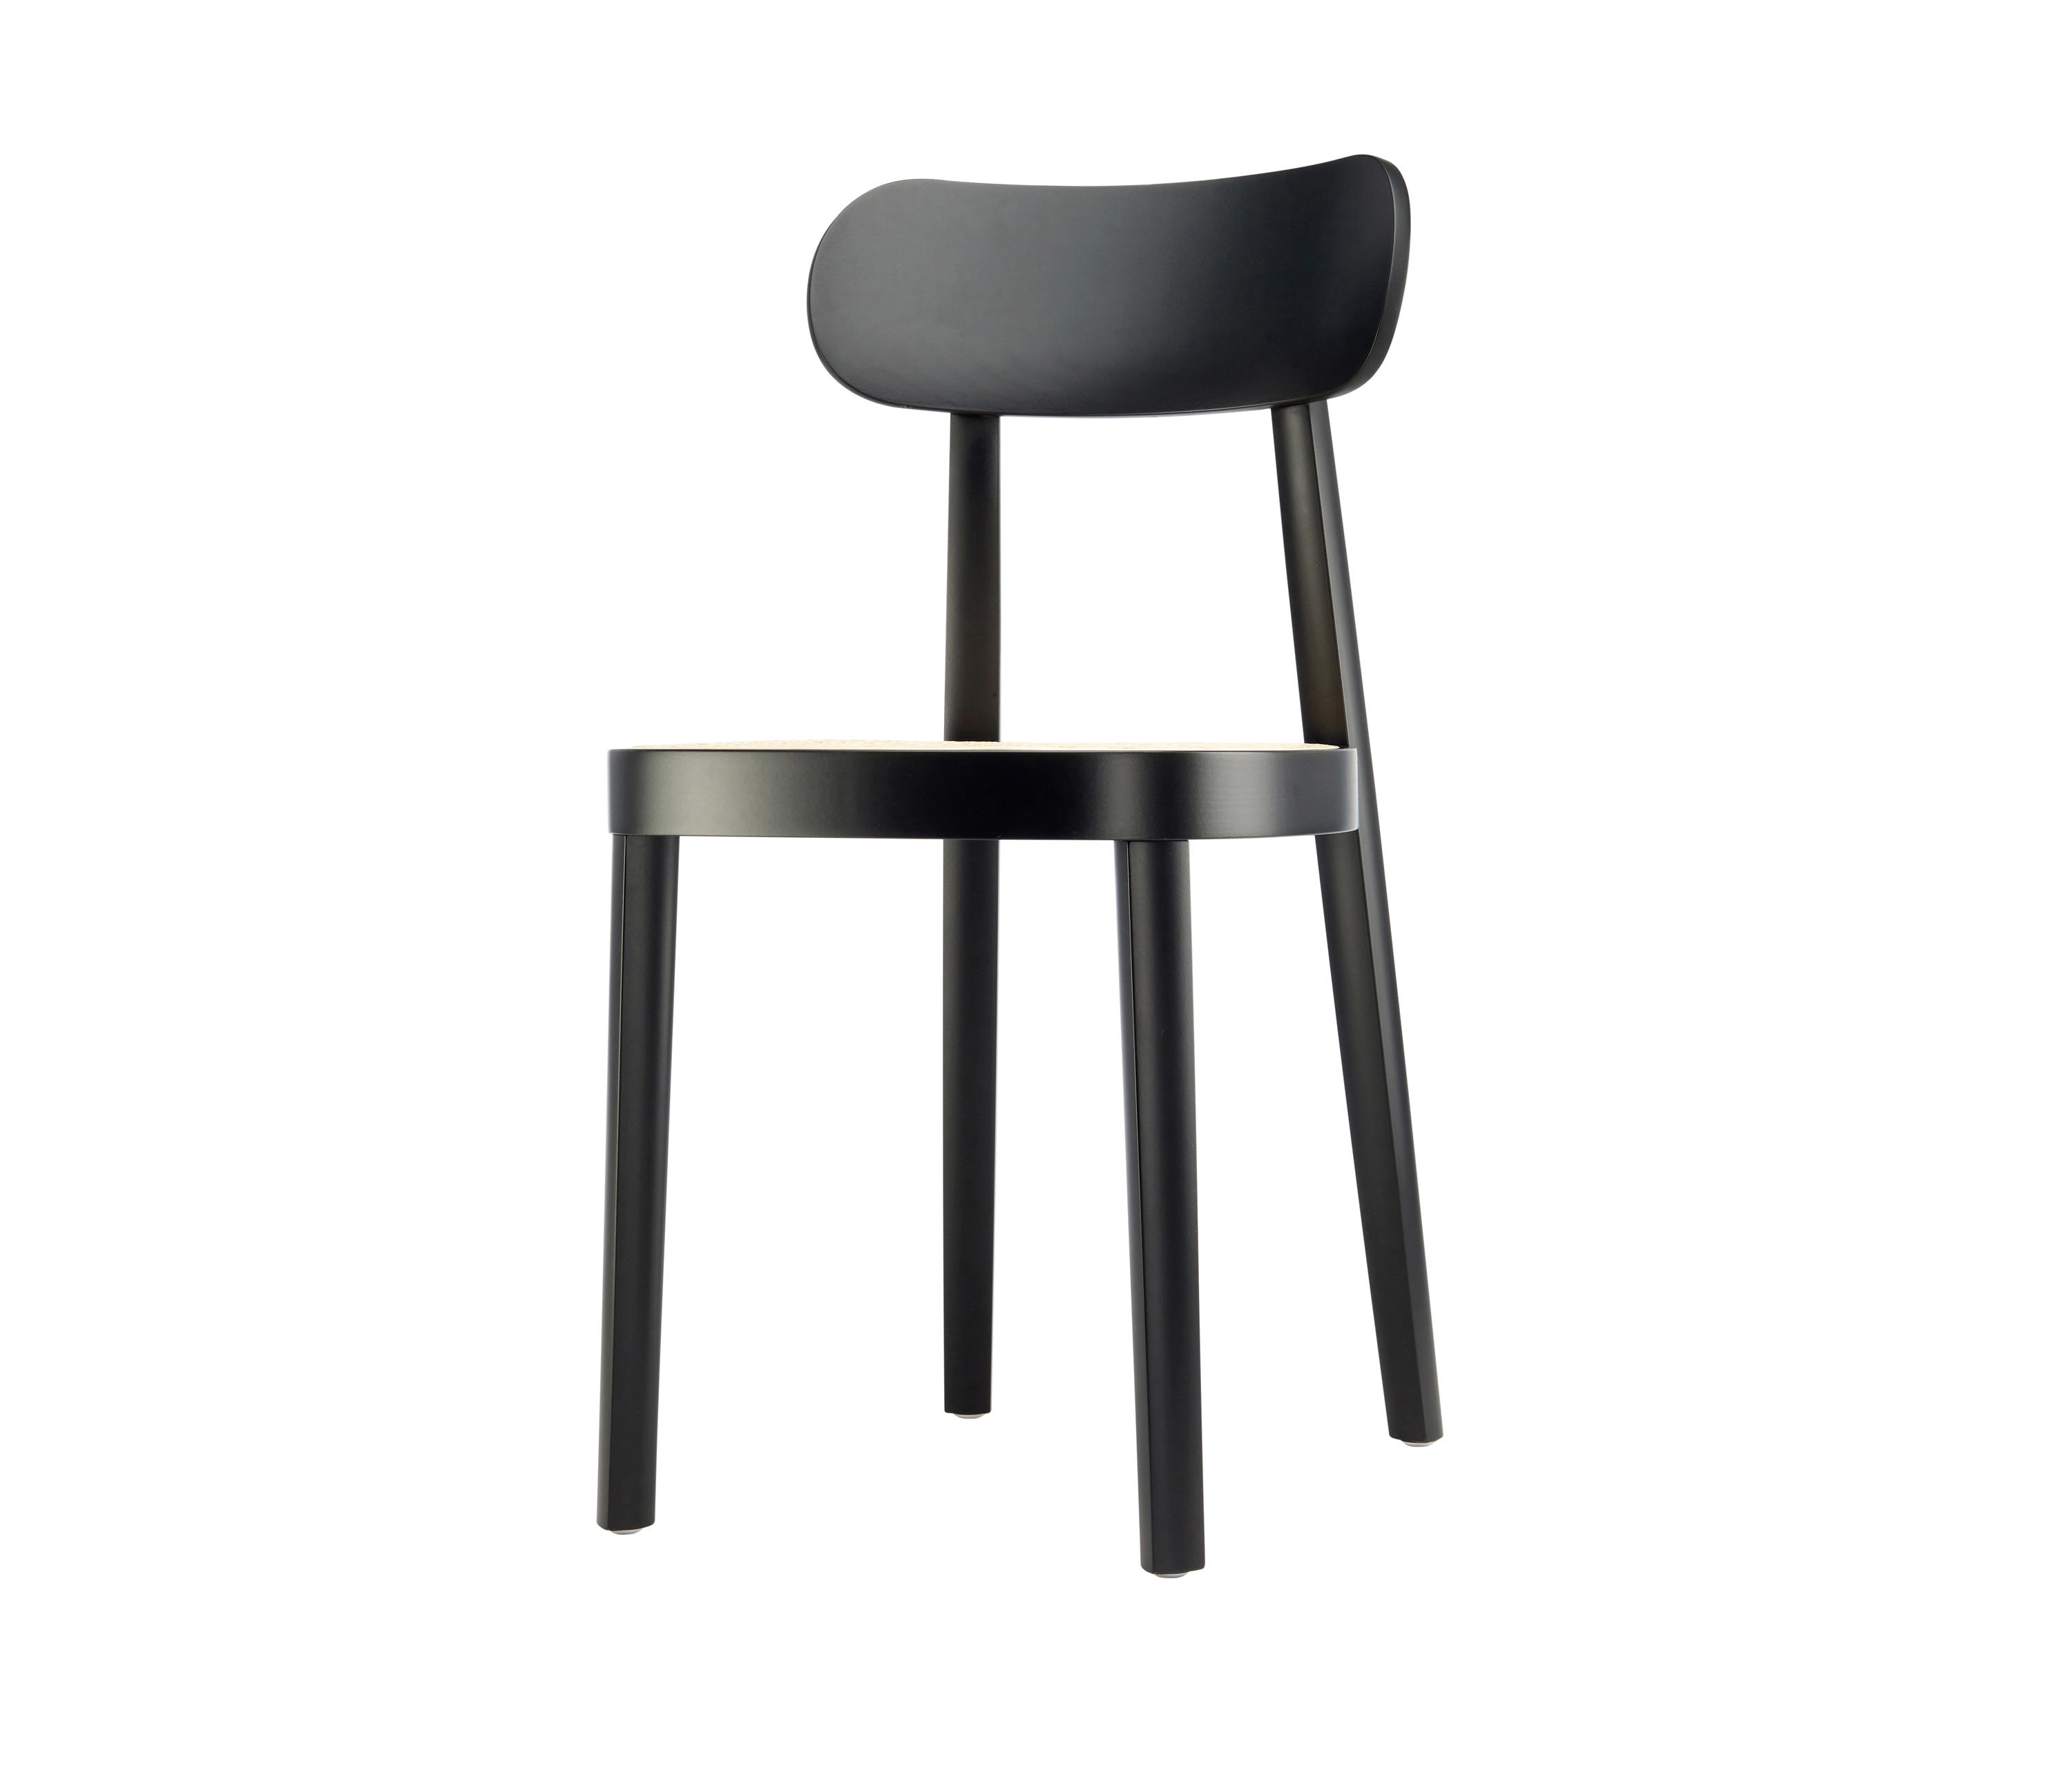 118 - Chairs from Thonet | Architonic